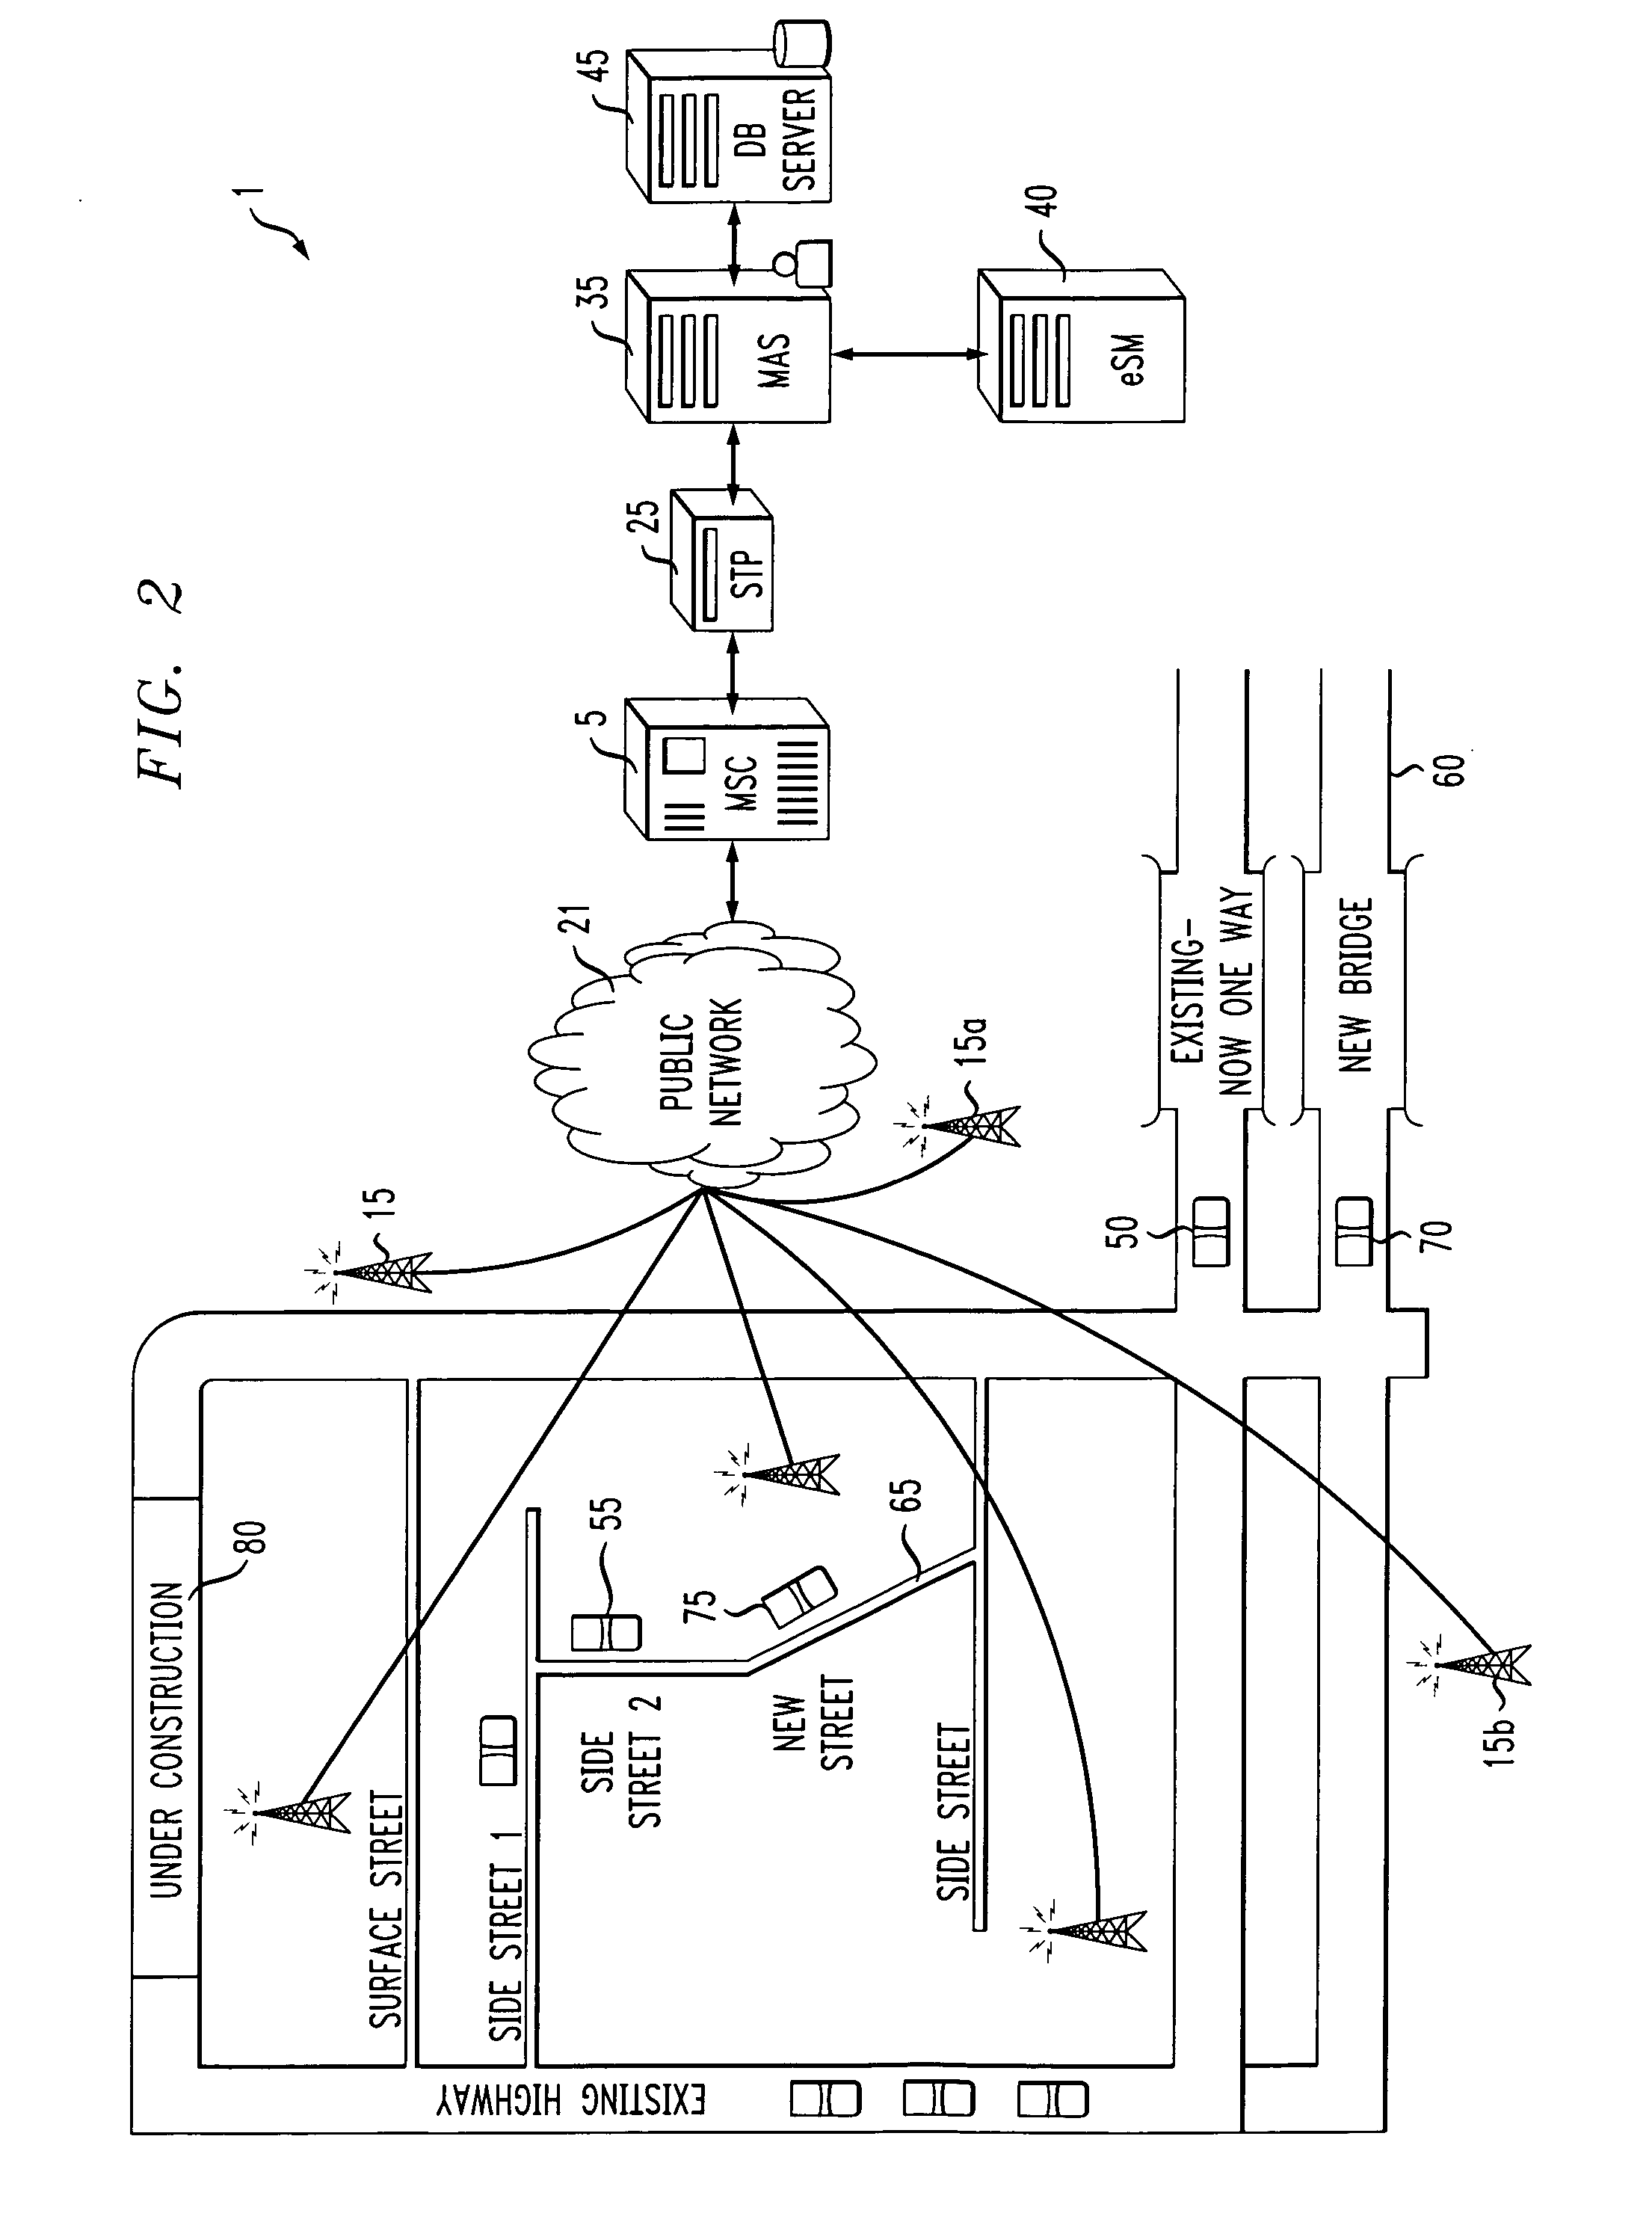 Method and apparatus for automated mapping cell handset location data to physical maps for data mining (traffic patterns, new roads)